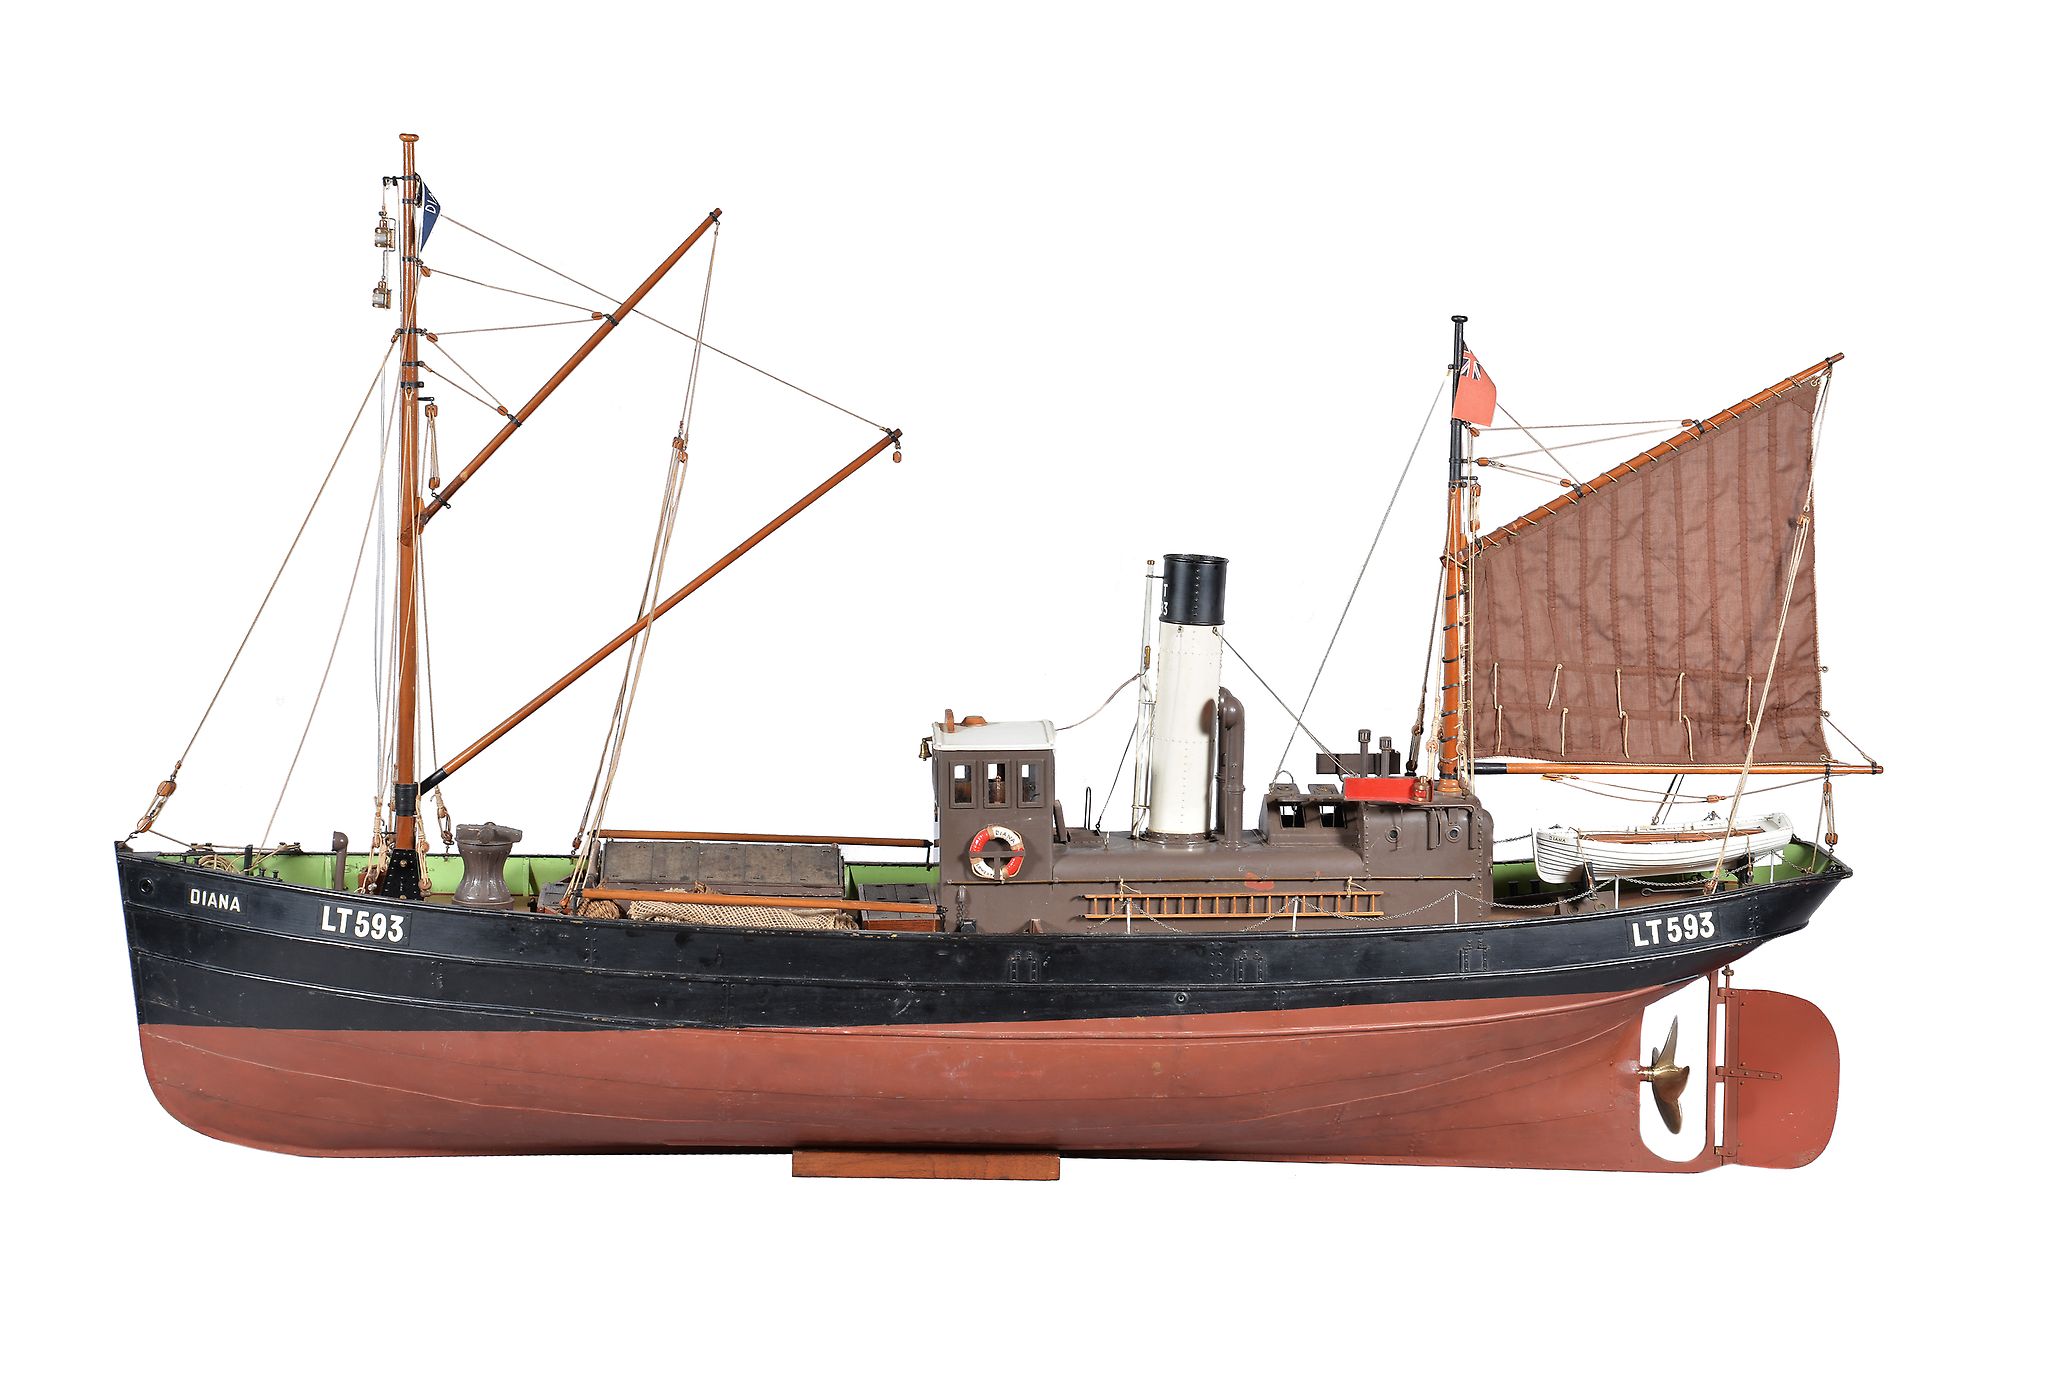 A fine exhibition quality and detailed model of the Lowestoft steam drifter Diana LT 593, built by